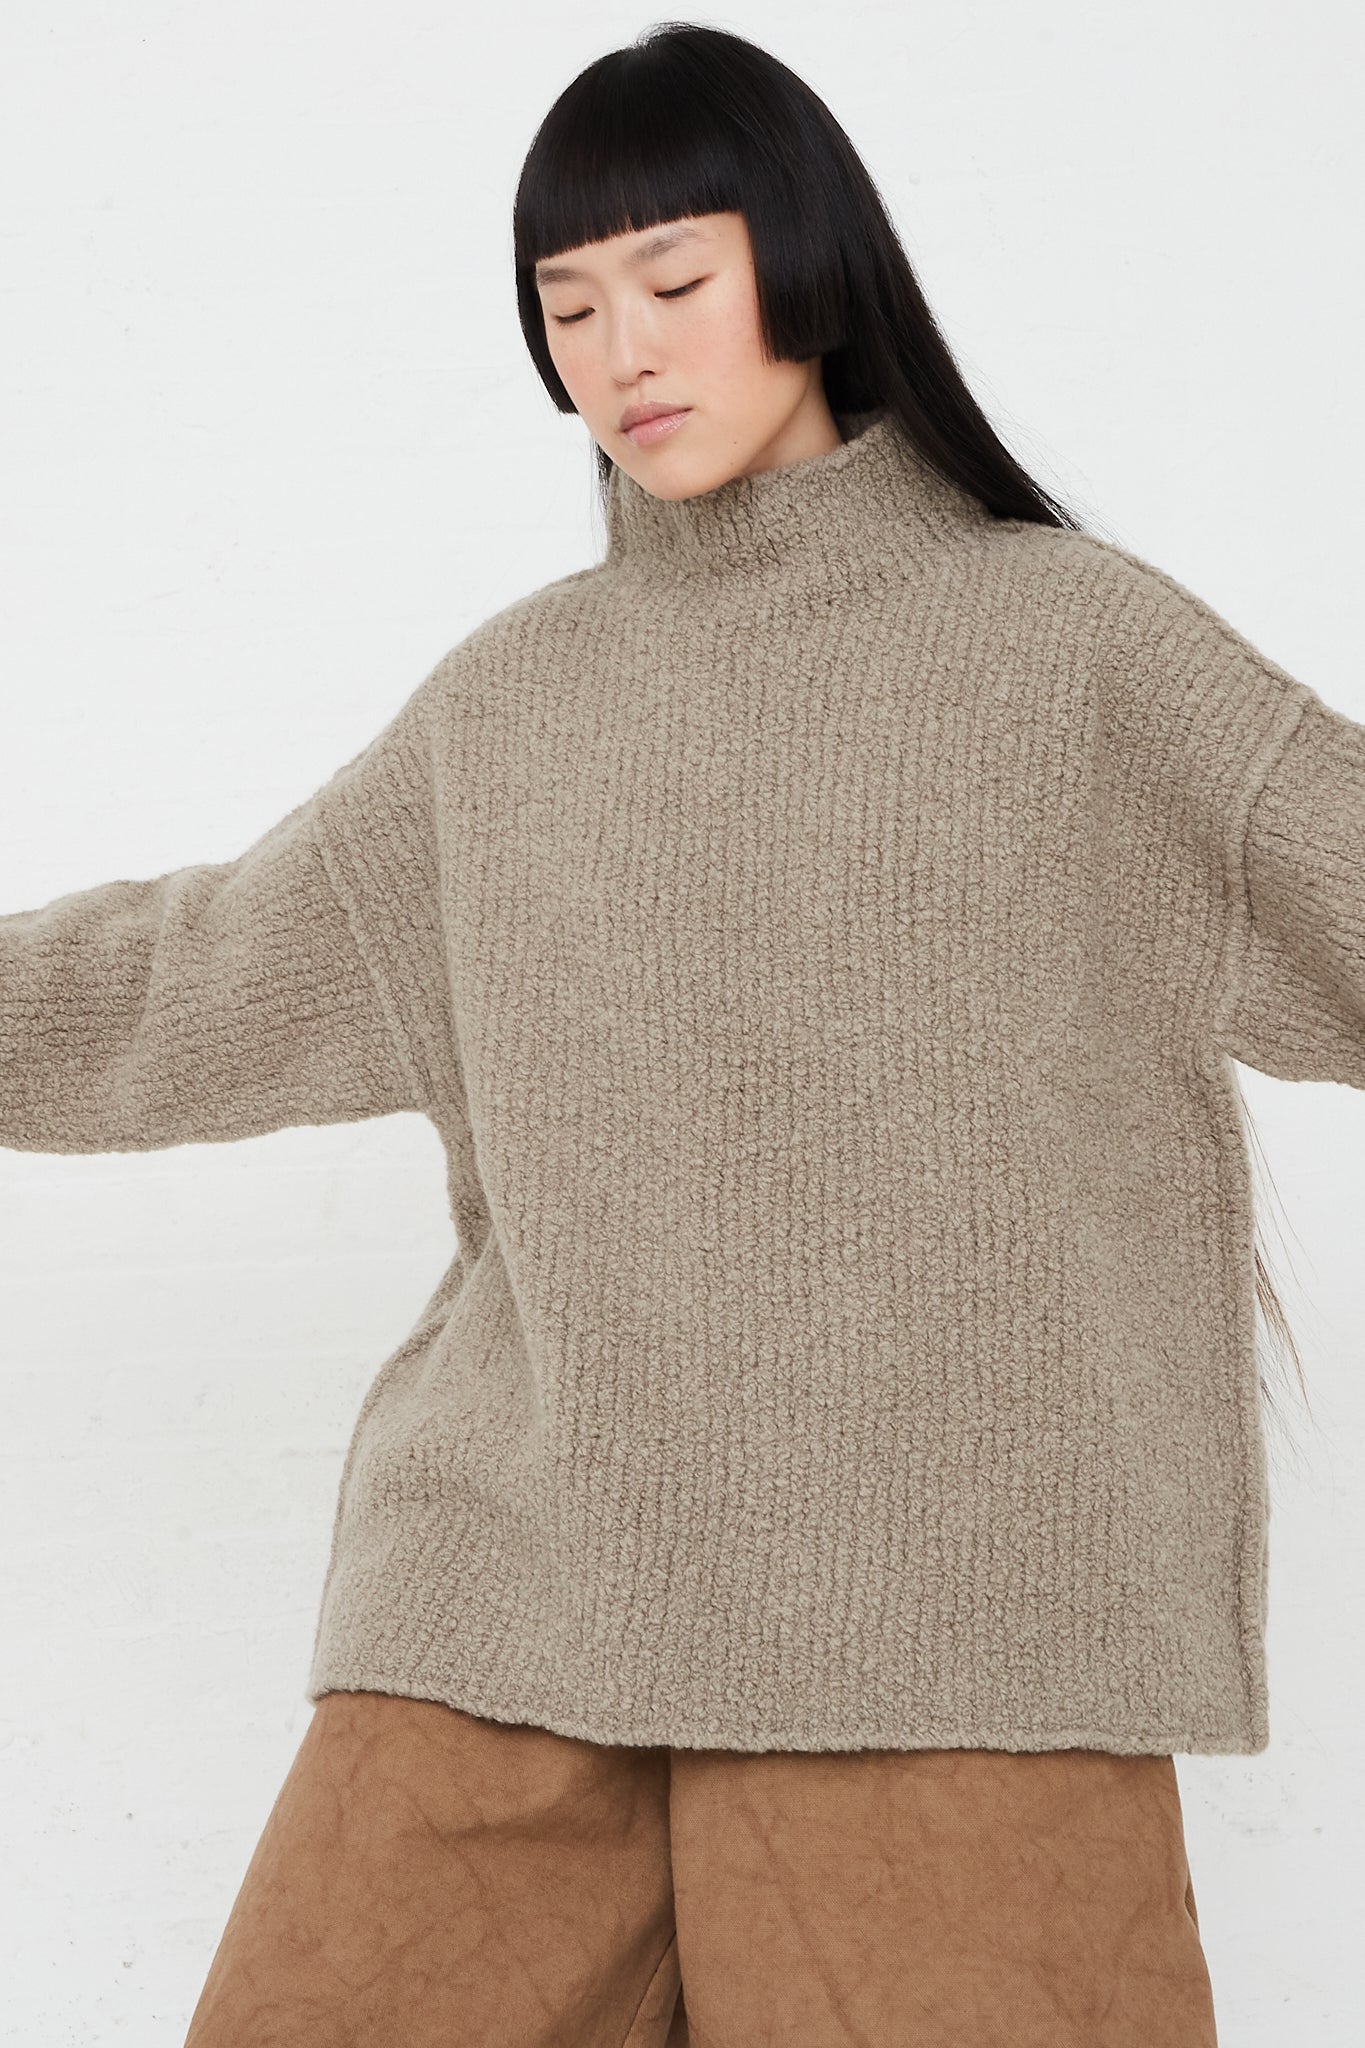 Taupe Turtleneck Sweater in Merino Boucle Wool by Lauren Manoogian for Oroboro Front